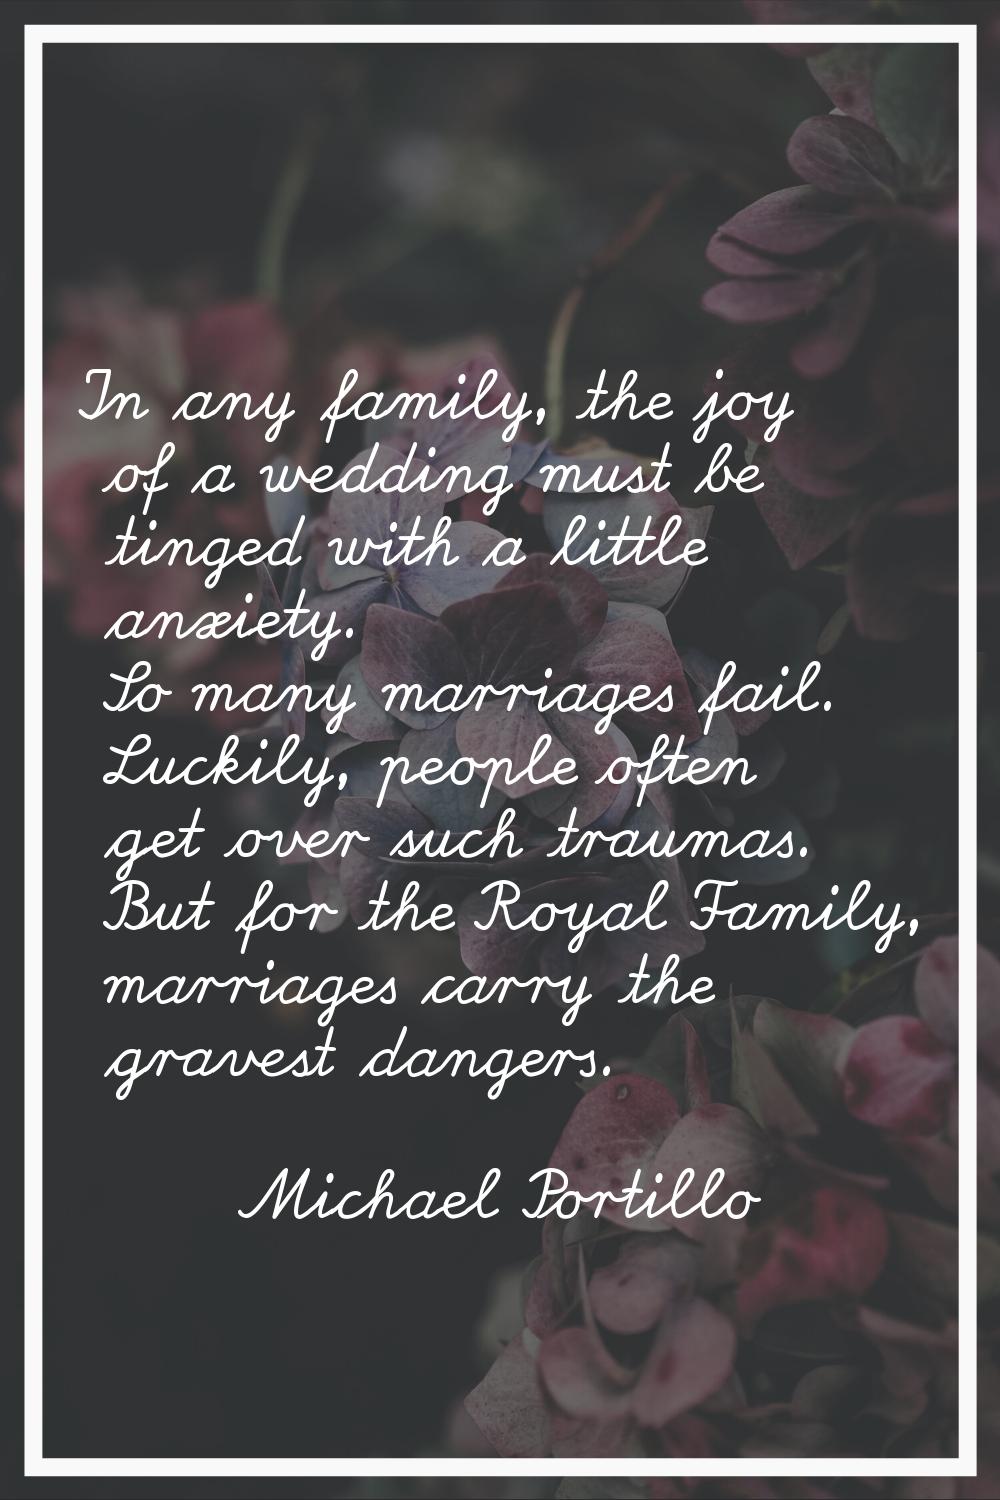 In any family, the joy of a wedding must be tinged with a little anxiety. So many marriages fail. L